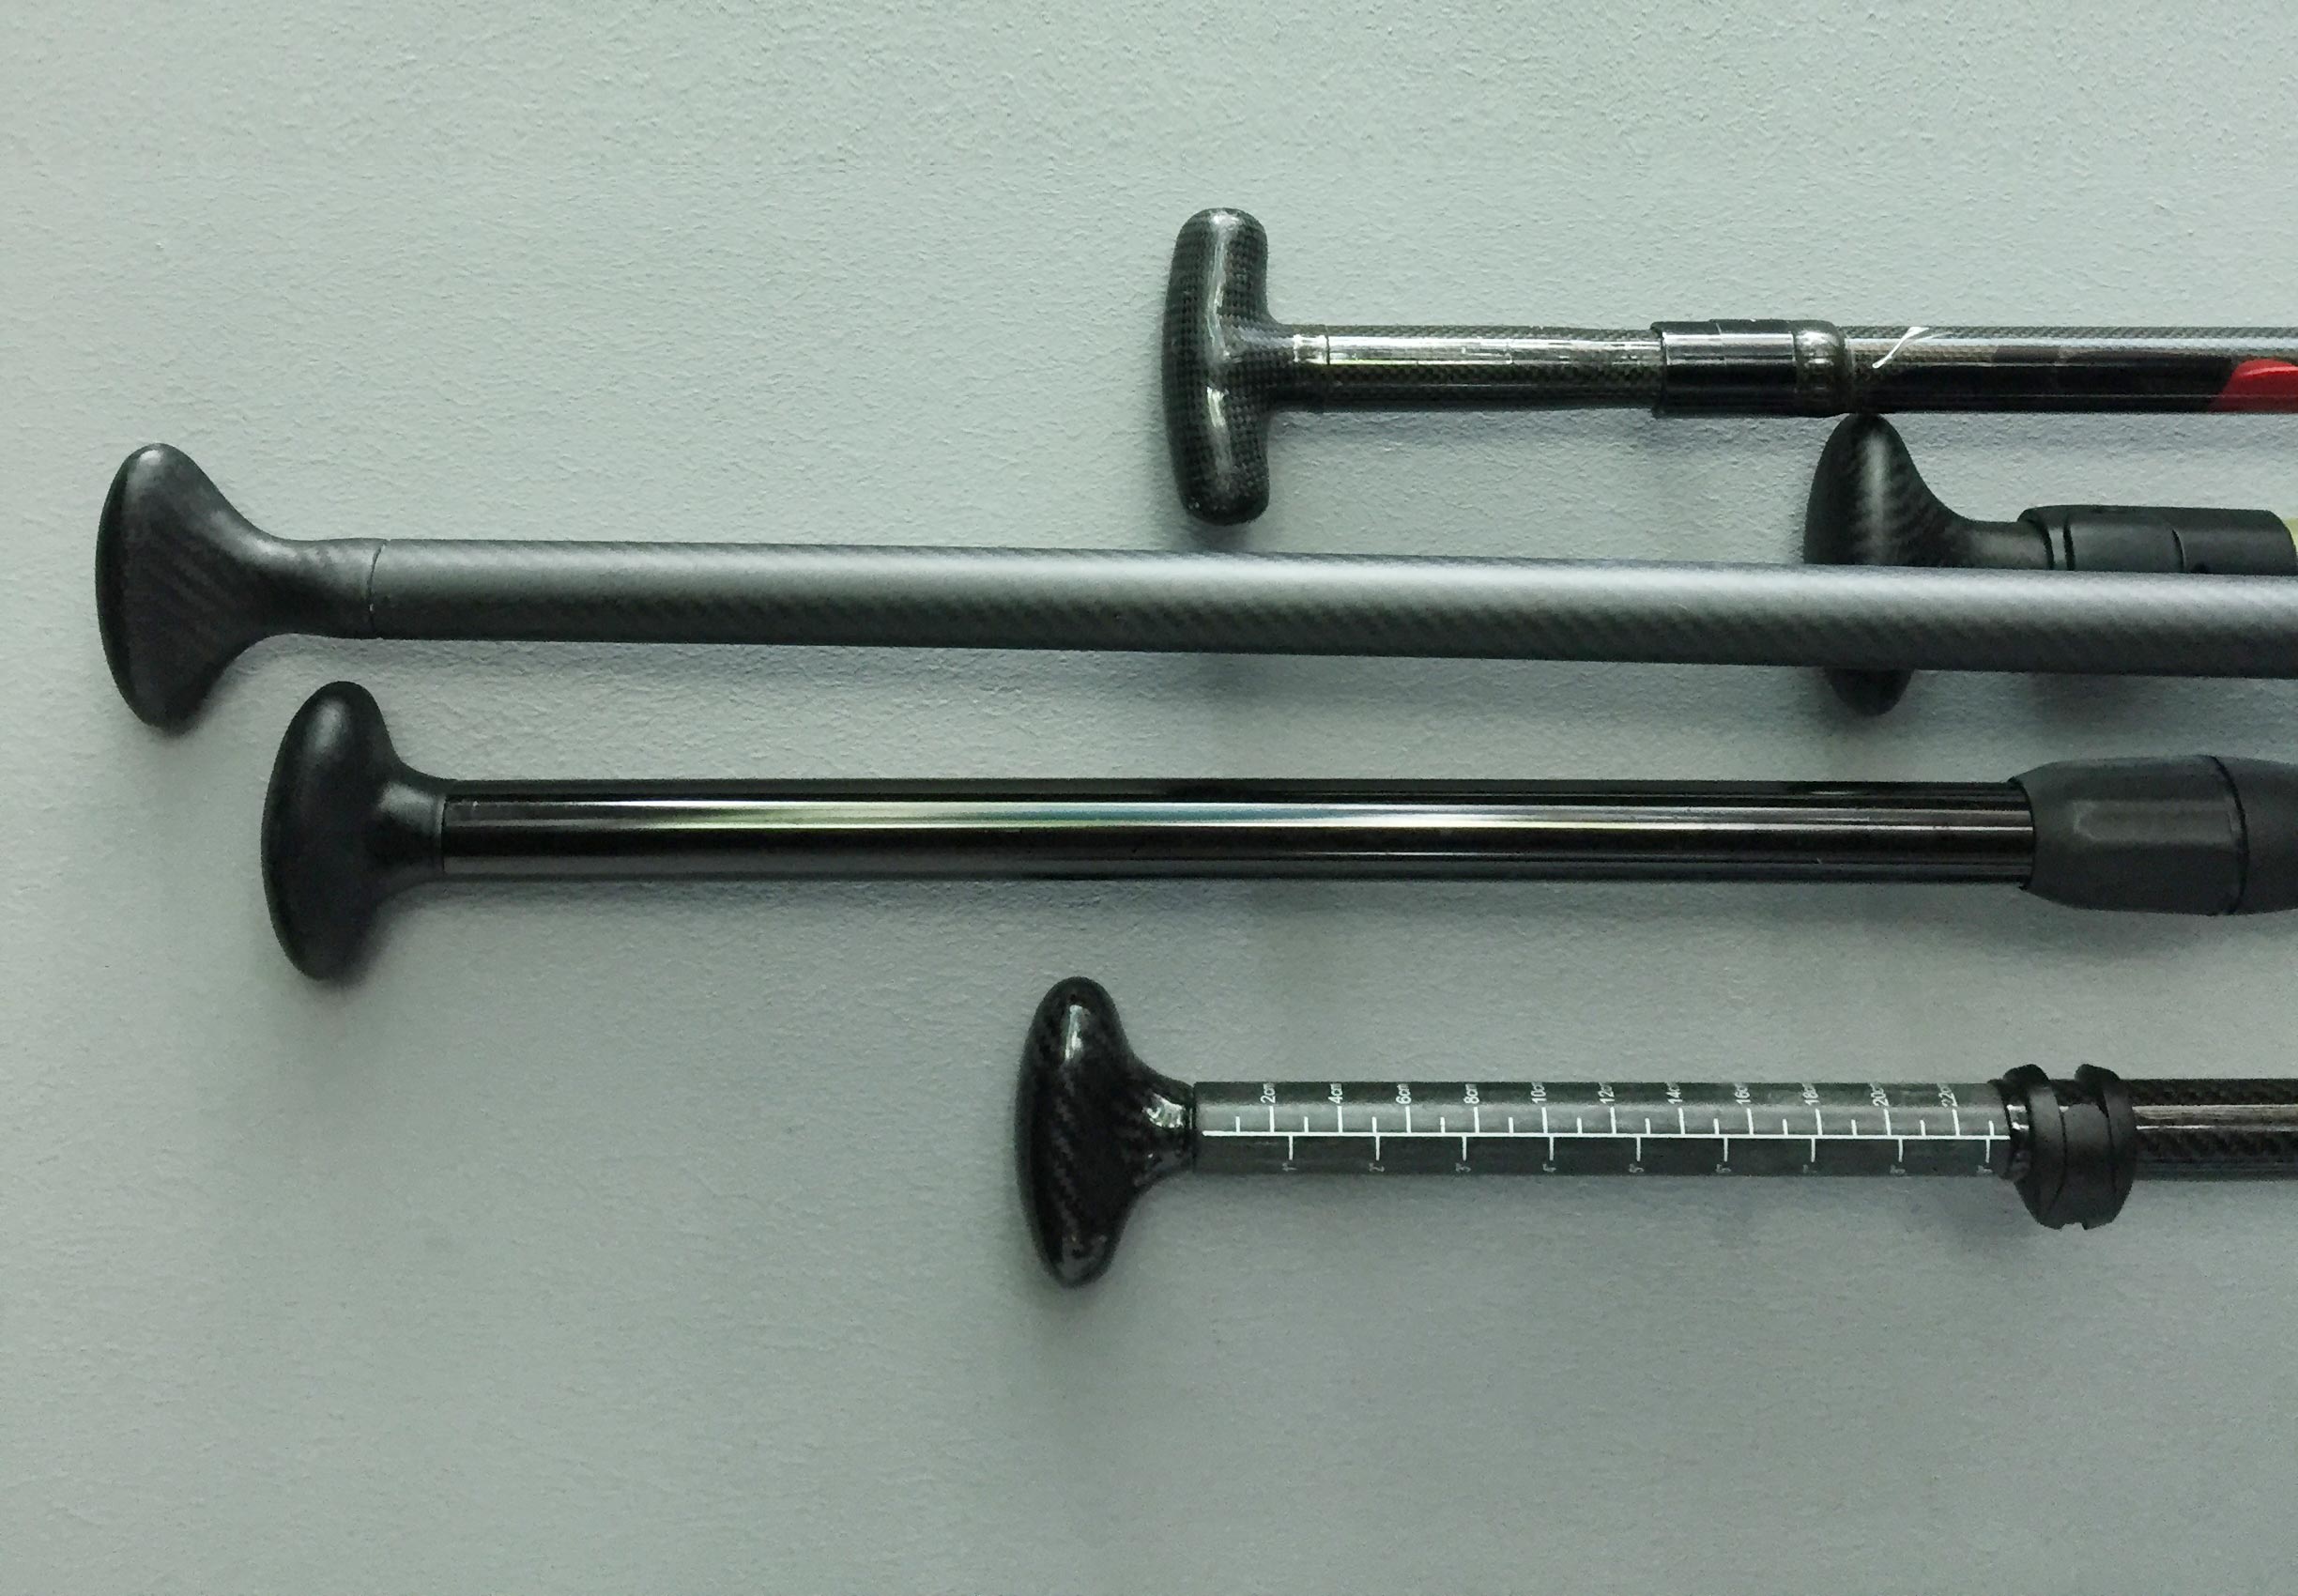 SUP Paddle shafts at different lengths